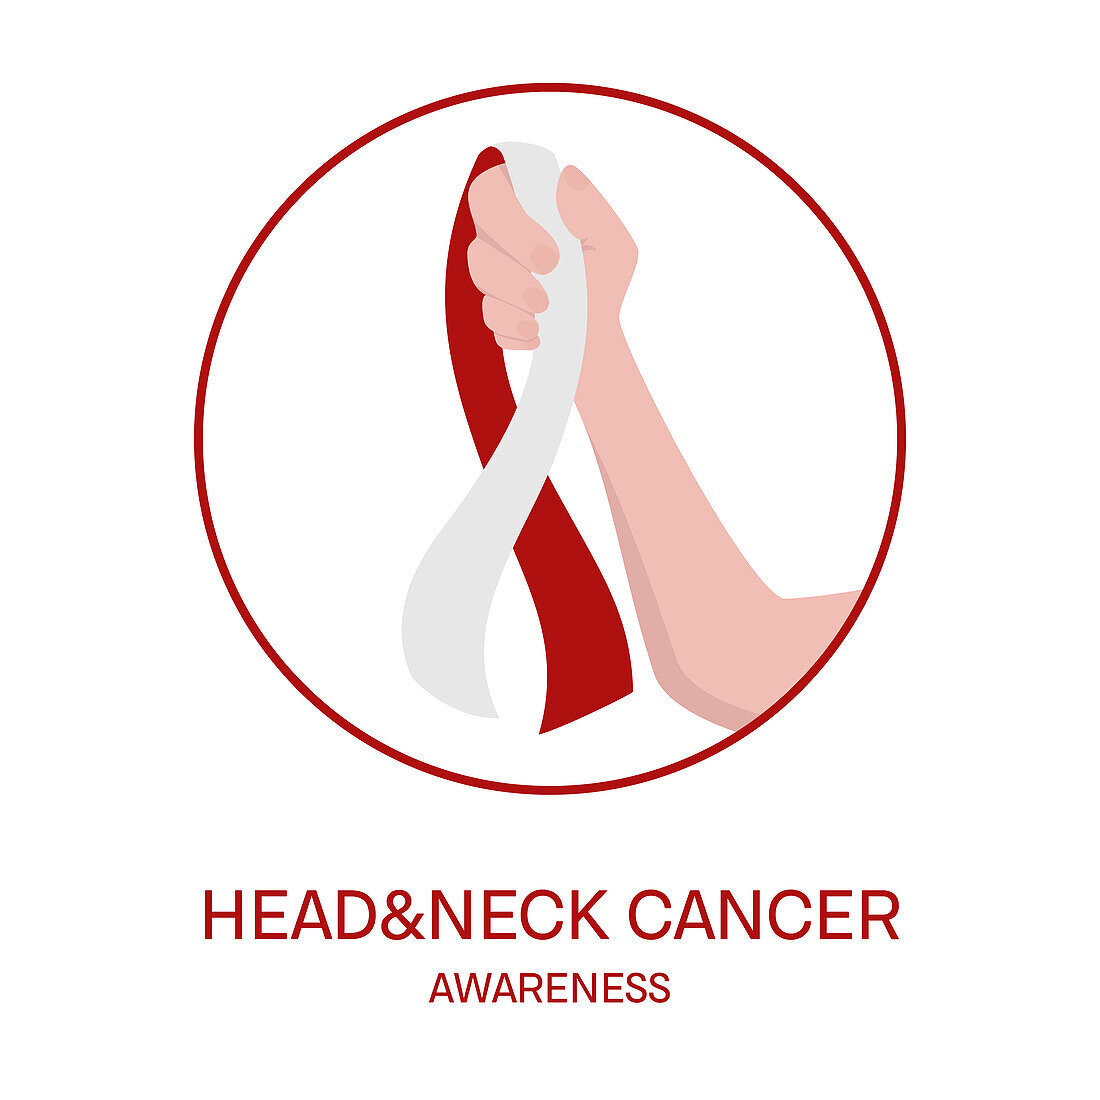 Head and neck cancer ribbon, conceptual illustration